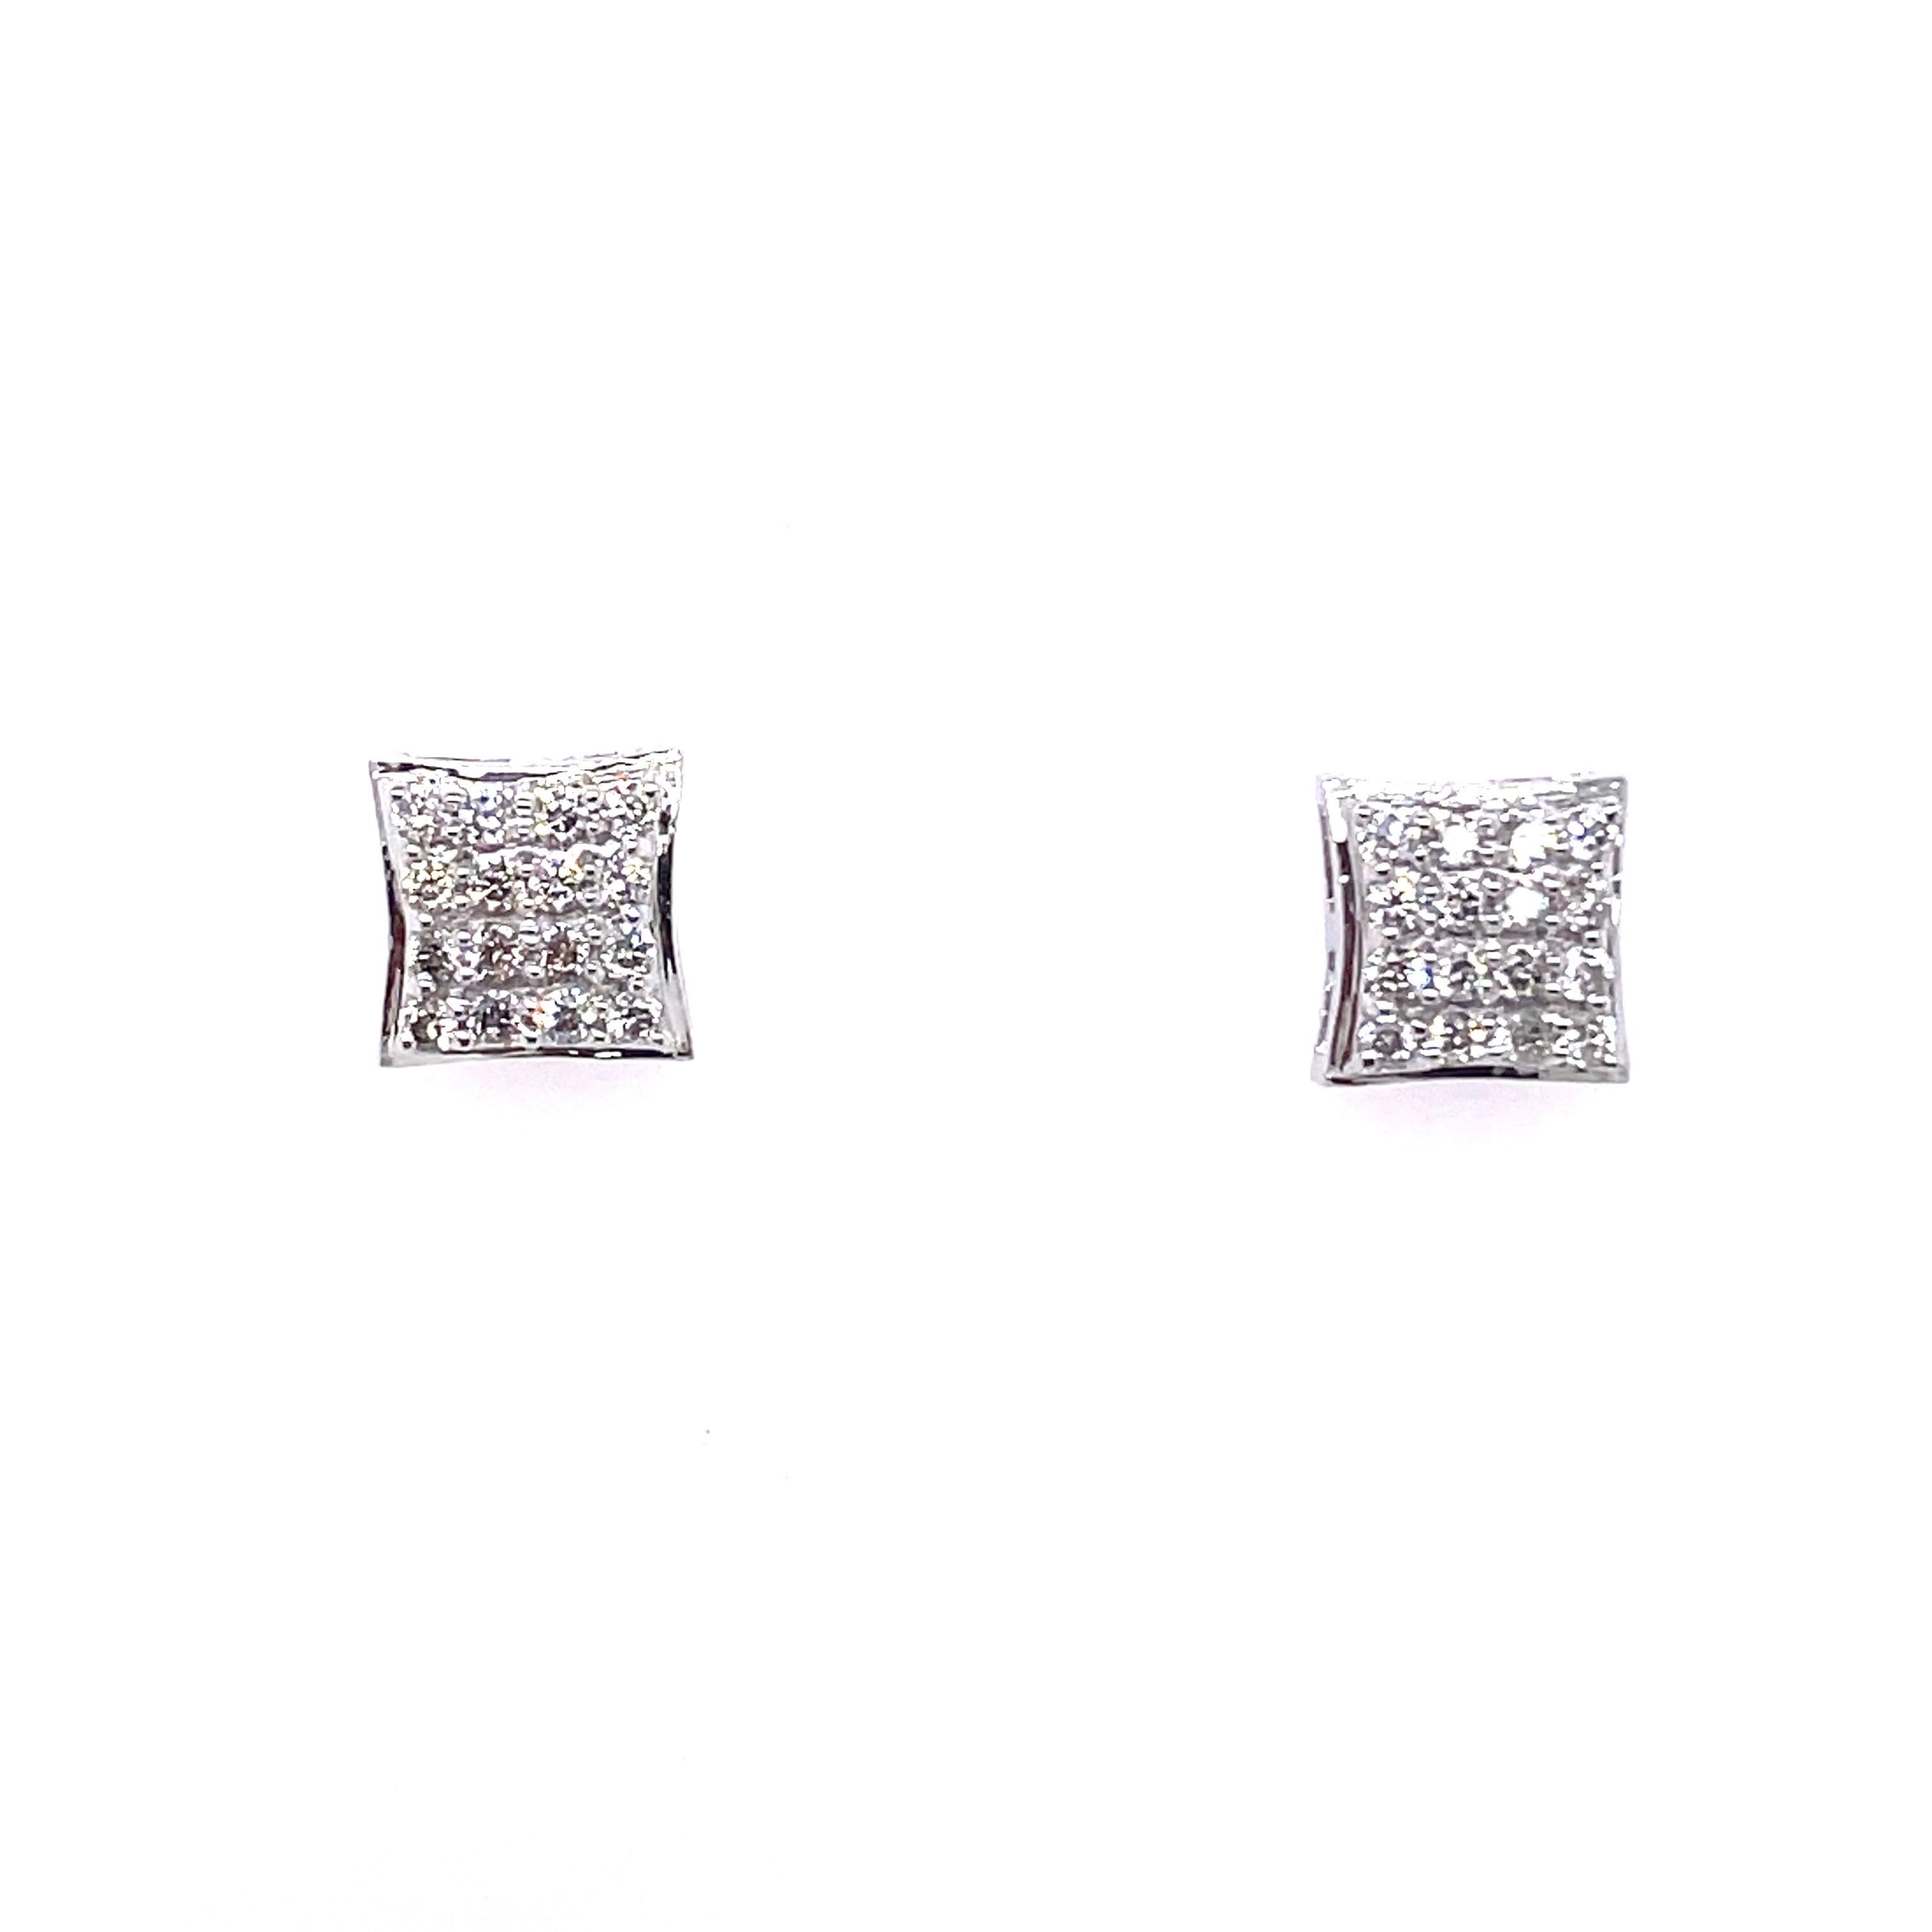 14k White Gold Diamond Stud Earrings 

Crafted with 14 karats of pure white gold, and weighing 3.45 grams, these earrings are a symphony of luxury and brilliance.

Each earring is graced with a mesmerizing array of diamonds totally weighing 0.48